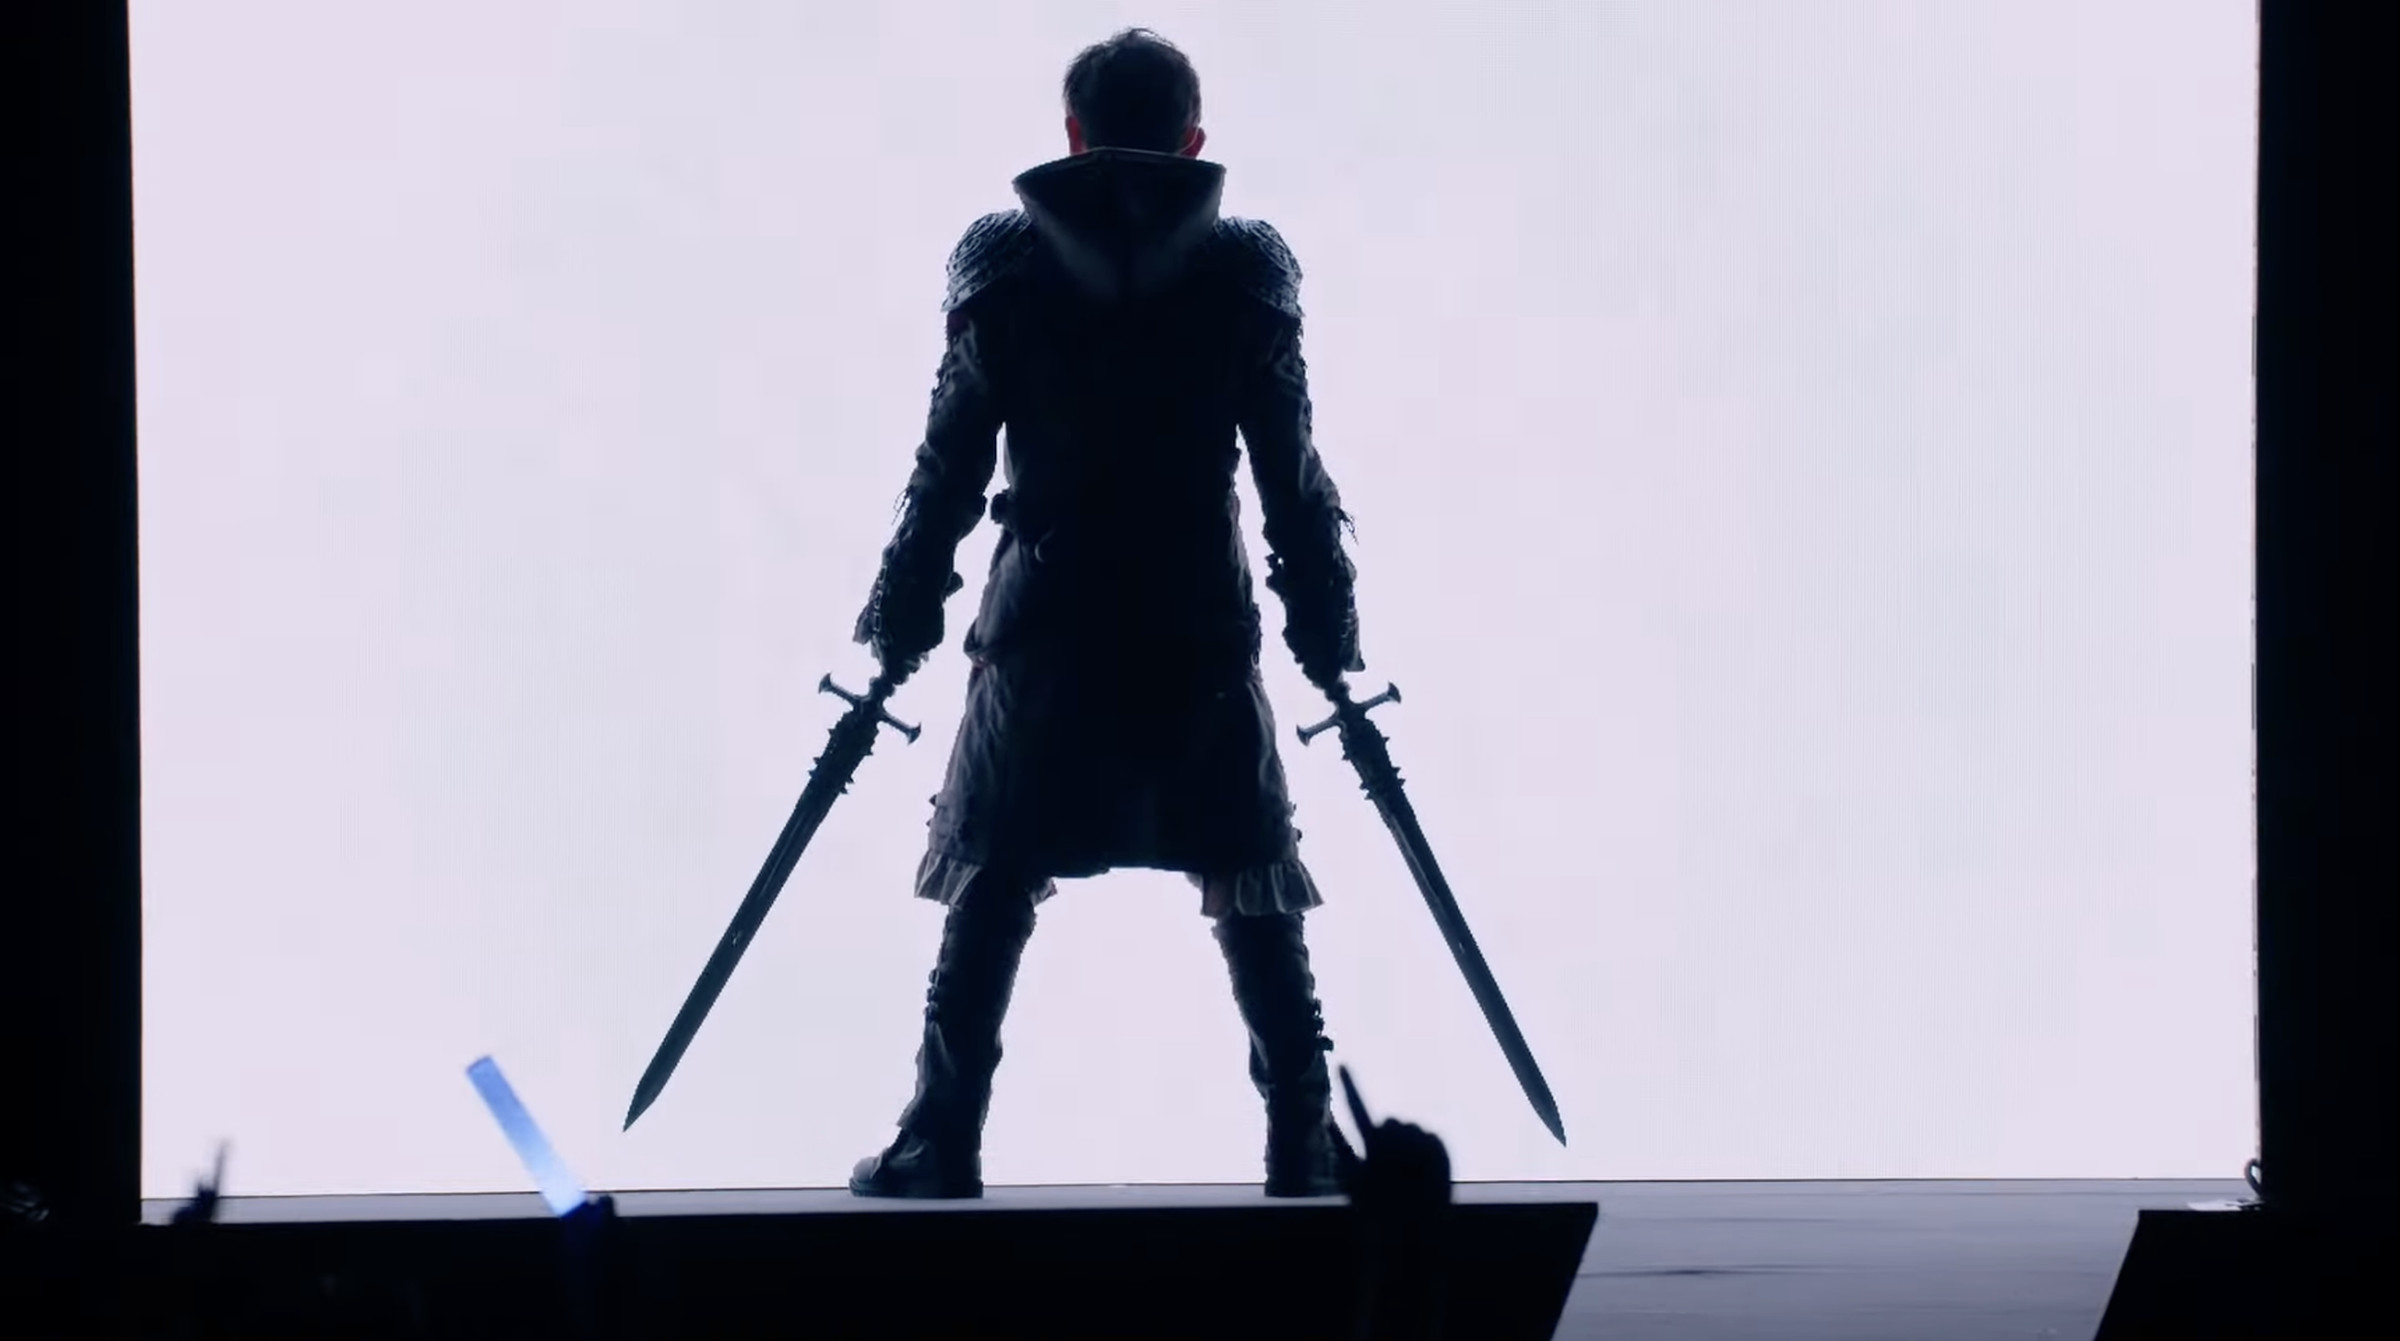 Image from the 2023 Final Fantasy XIV Fan Festival London featuring game producer Naoki Yoshida standing silhouetted against a white screen holding two swords dressed as the new Viper DPS class from FFXIV.